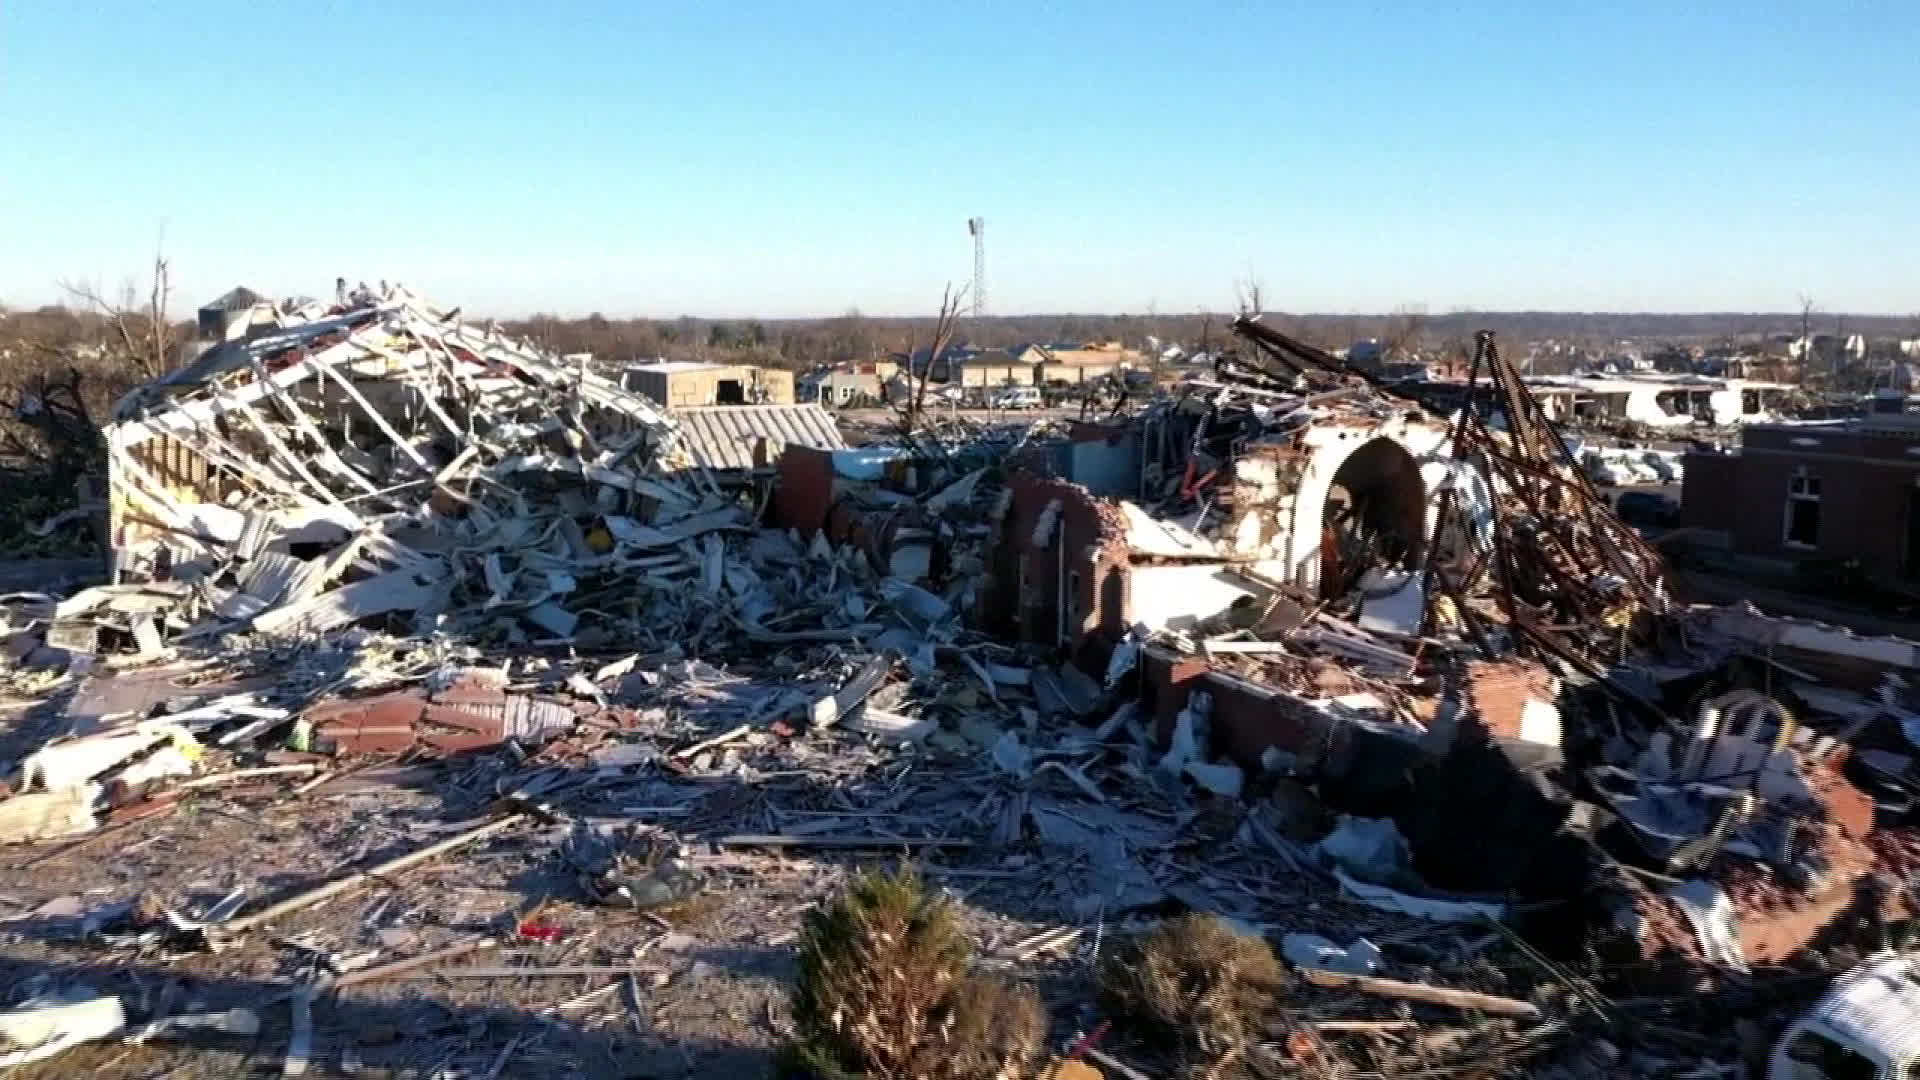 Kentucky Candle Factory Leveled by Tornado Was Making Bath & Body